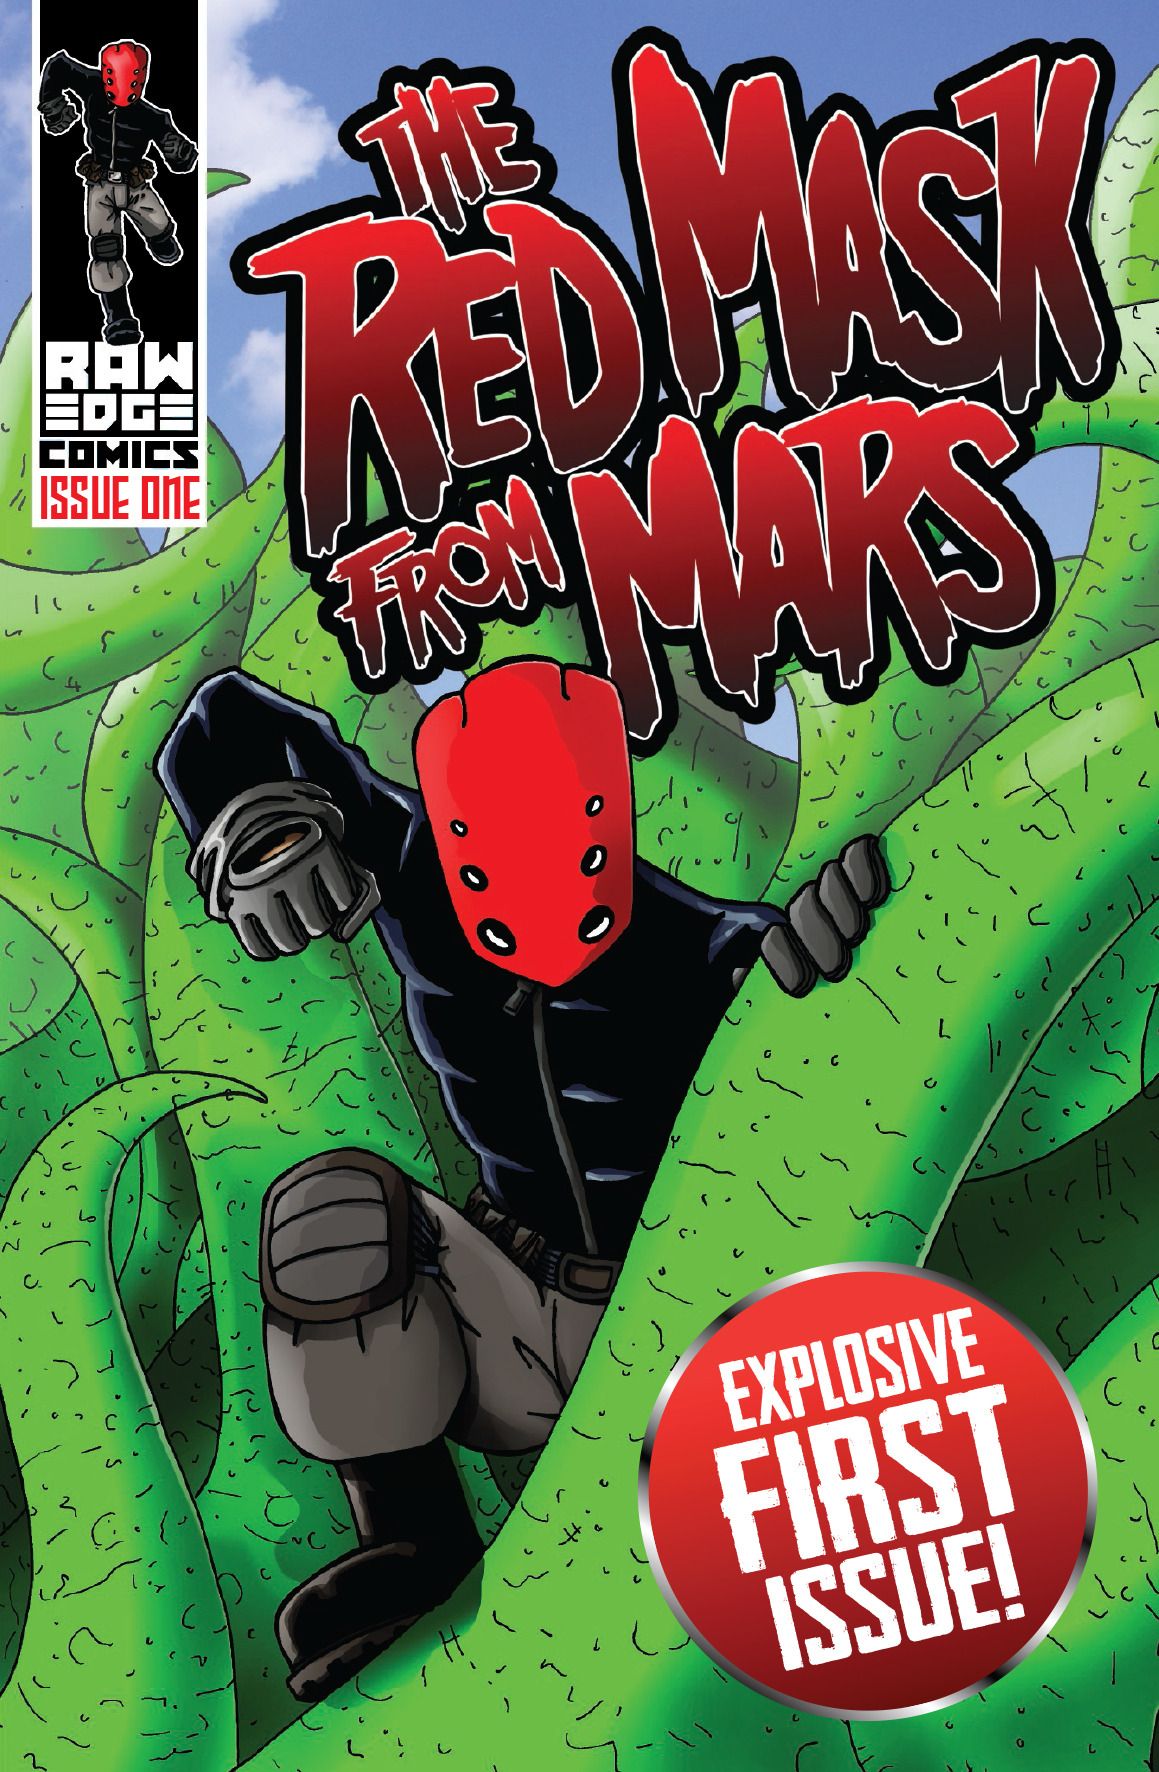 The Red Mask From Mars #1 - Cover